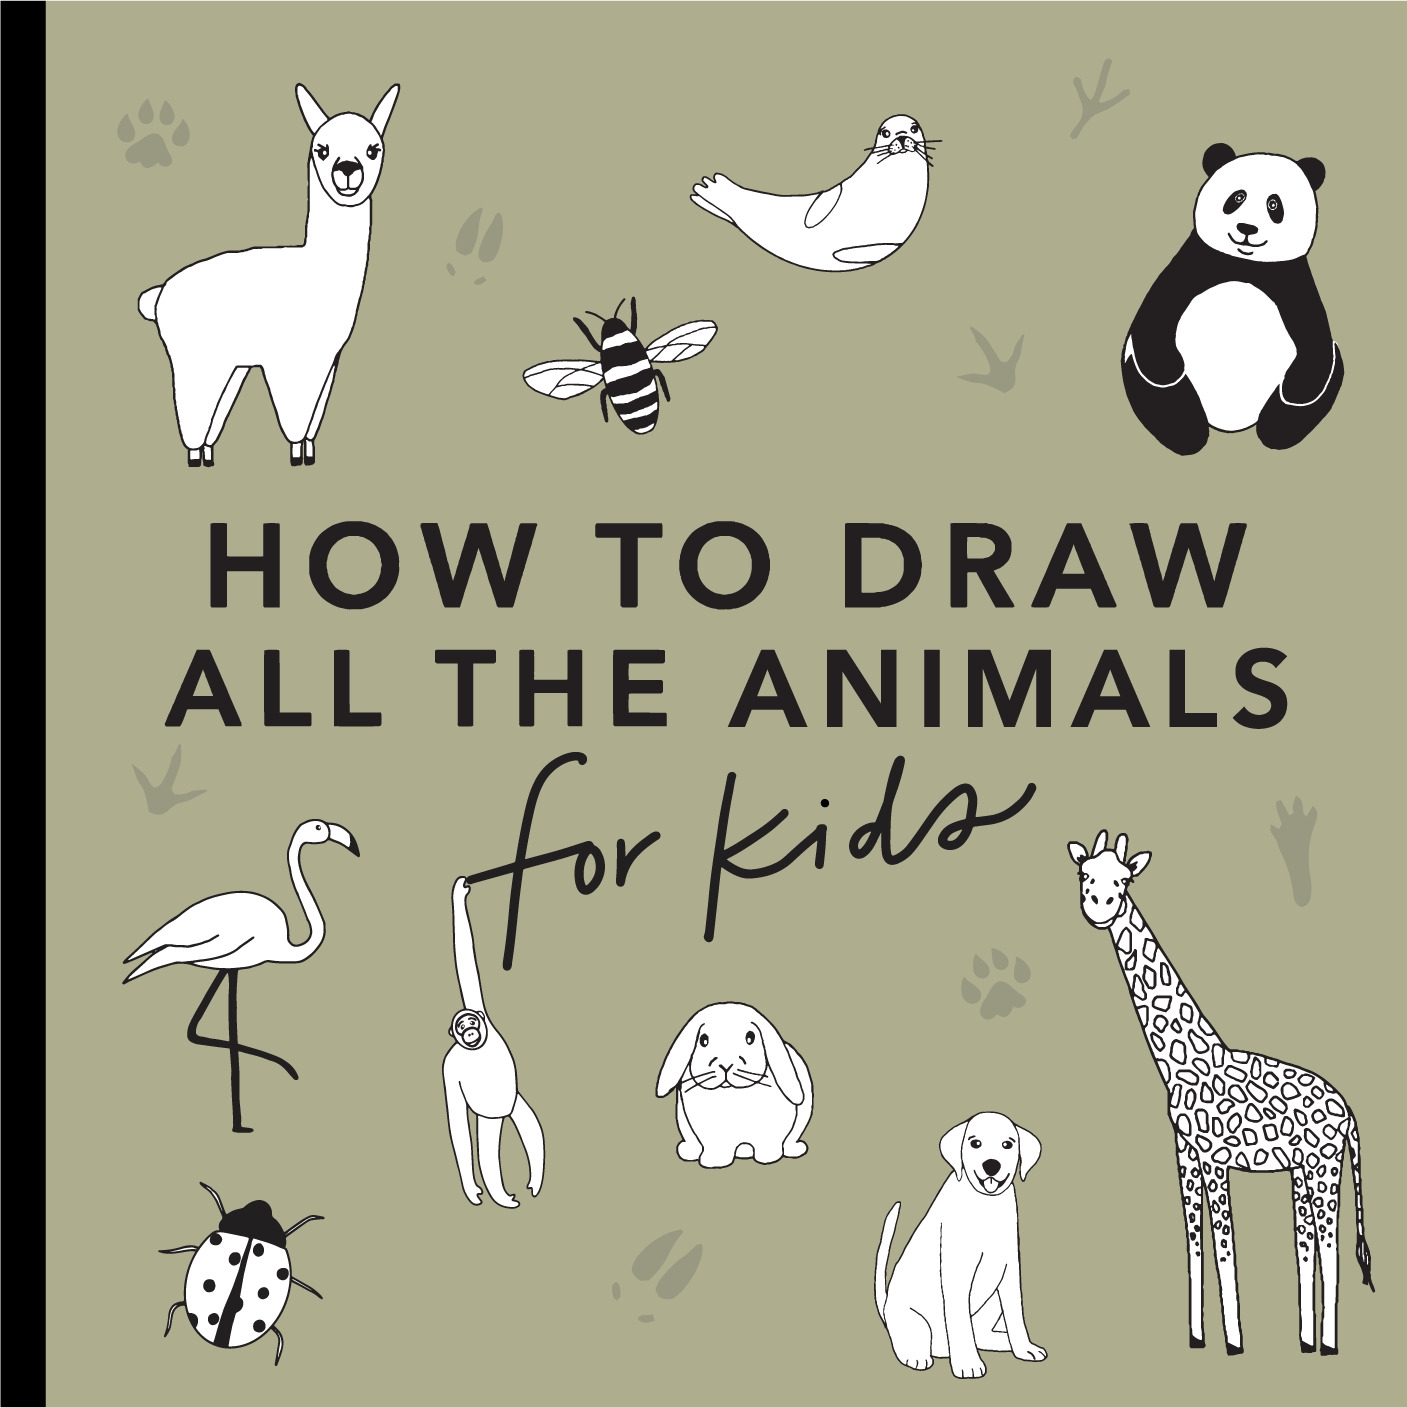 All the Things: How to Draw Books for Kids by Alli Koch: 9781950968220 |  : Books